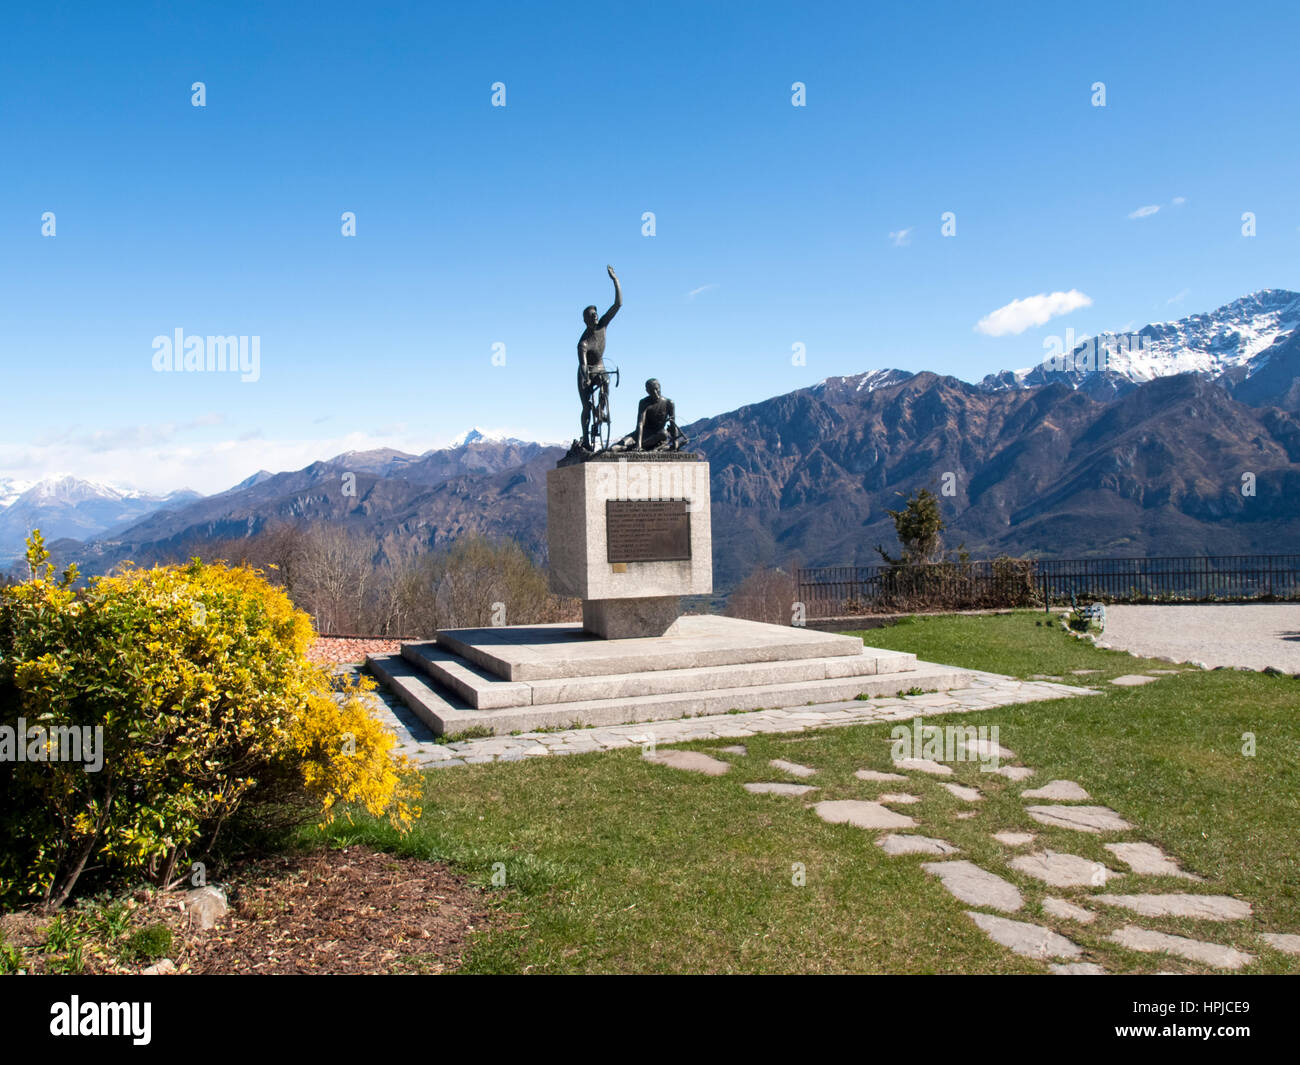 Ghisallo, Italy - April 1, 2015: Monument in memory of cyclists to he Madonna del Ghisallo, proclaimed Patroness of Cyclists by Pope Pius XII in 1946 Stock Photo